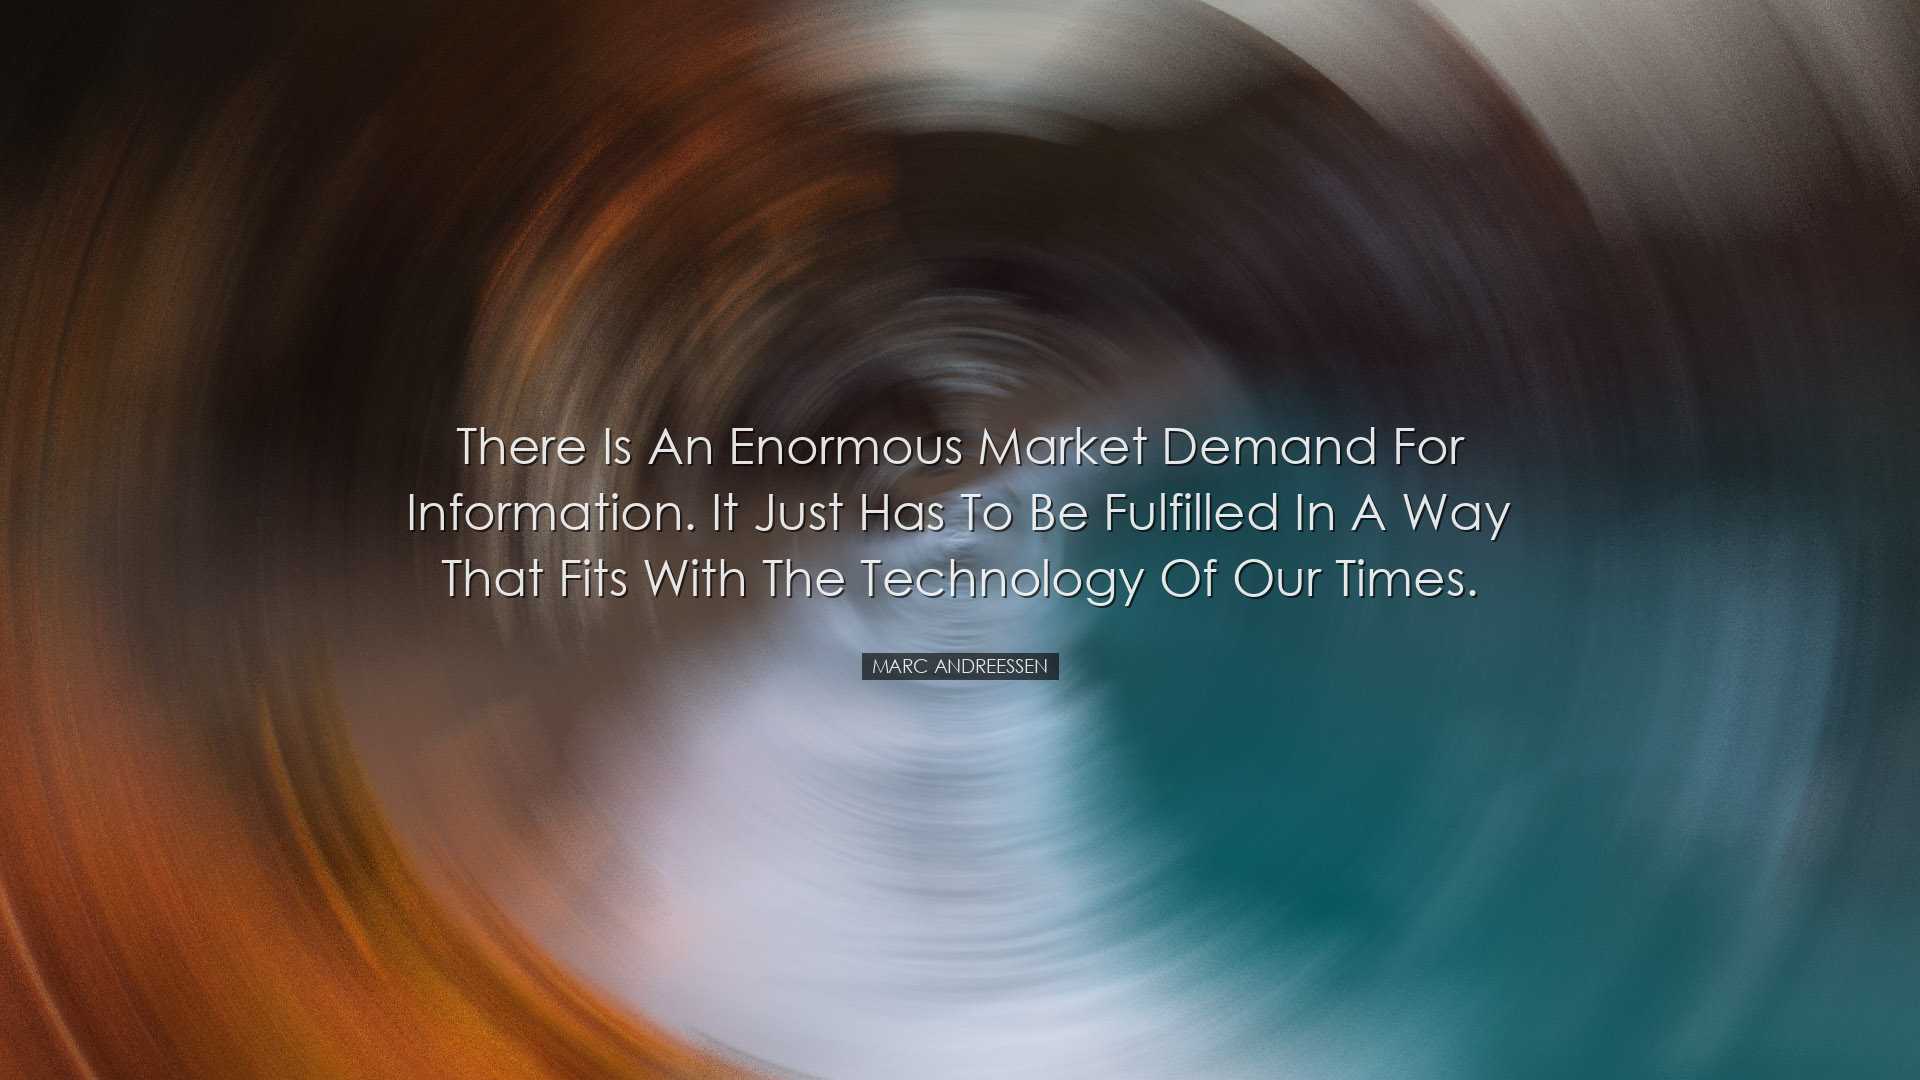 There is an enormous market demand for information. It just has to